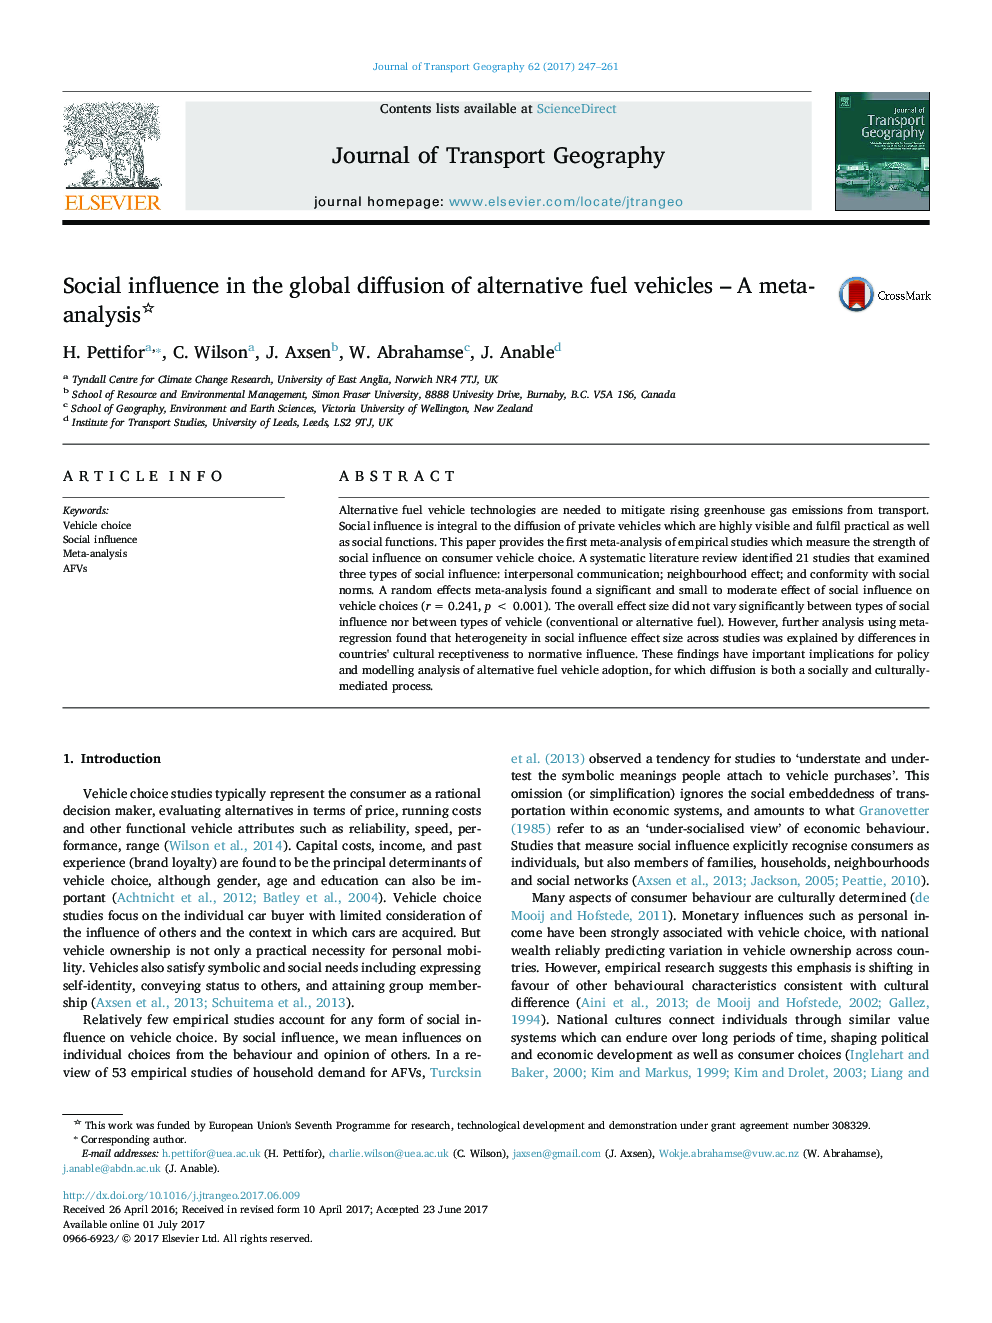 Social influence in the global diffusion of alternative fuel vehicles - A meta-analysis